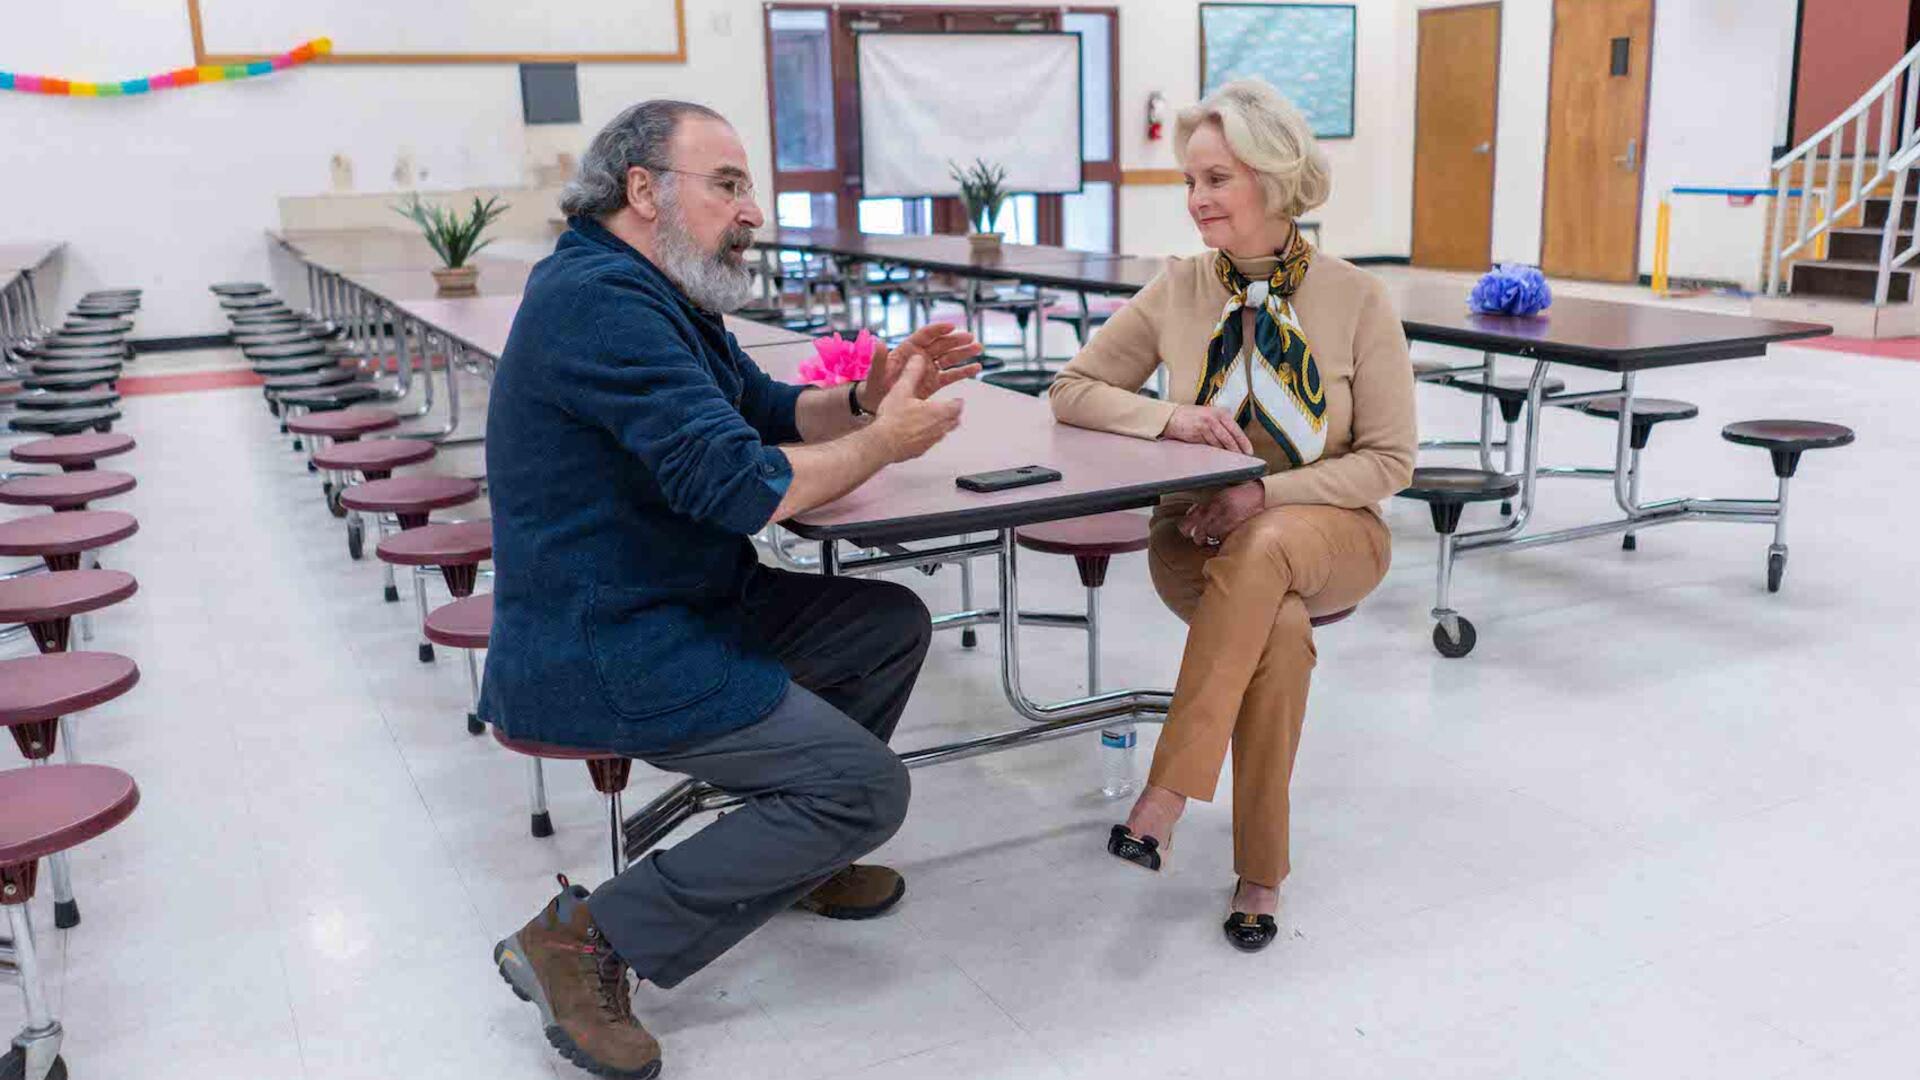 Mandy Patinkin and Cindy McCain at International Rescue Committee welcome center in Phoenix, Arizona